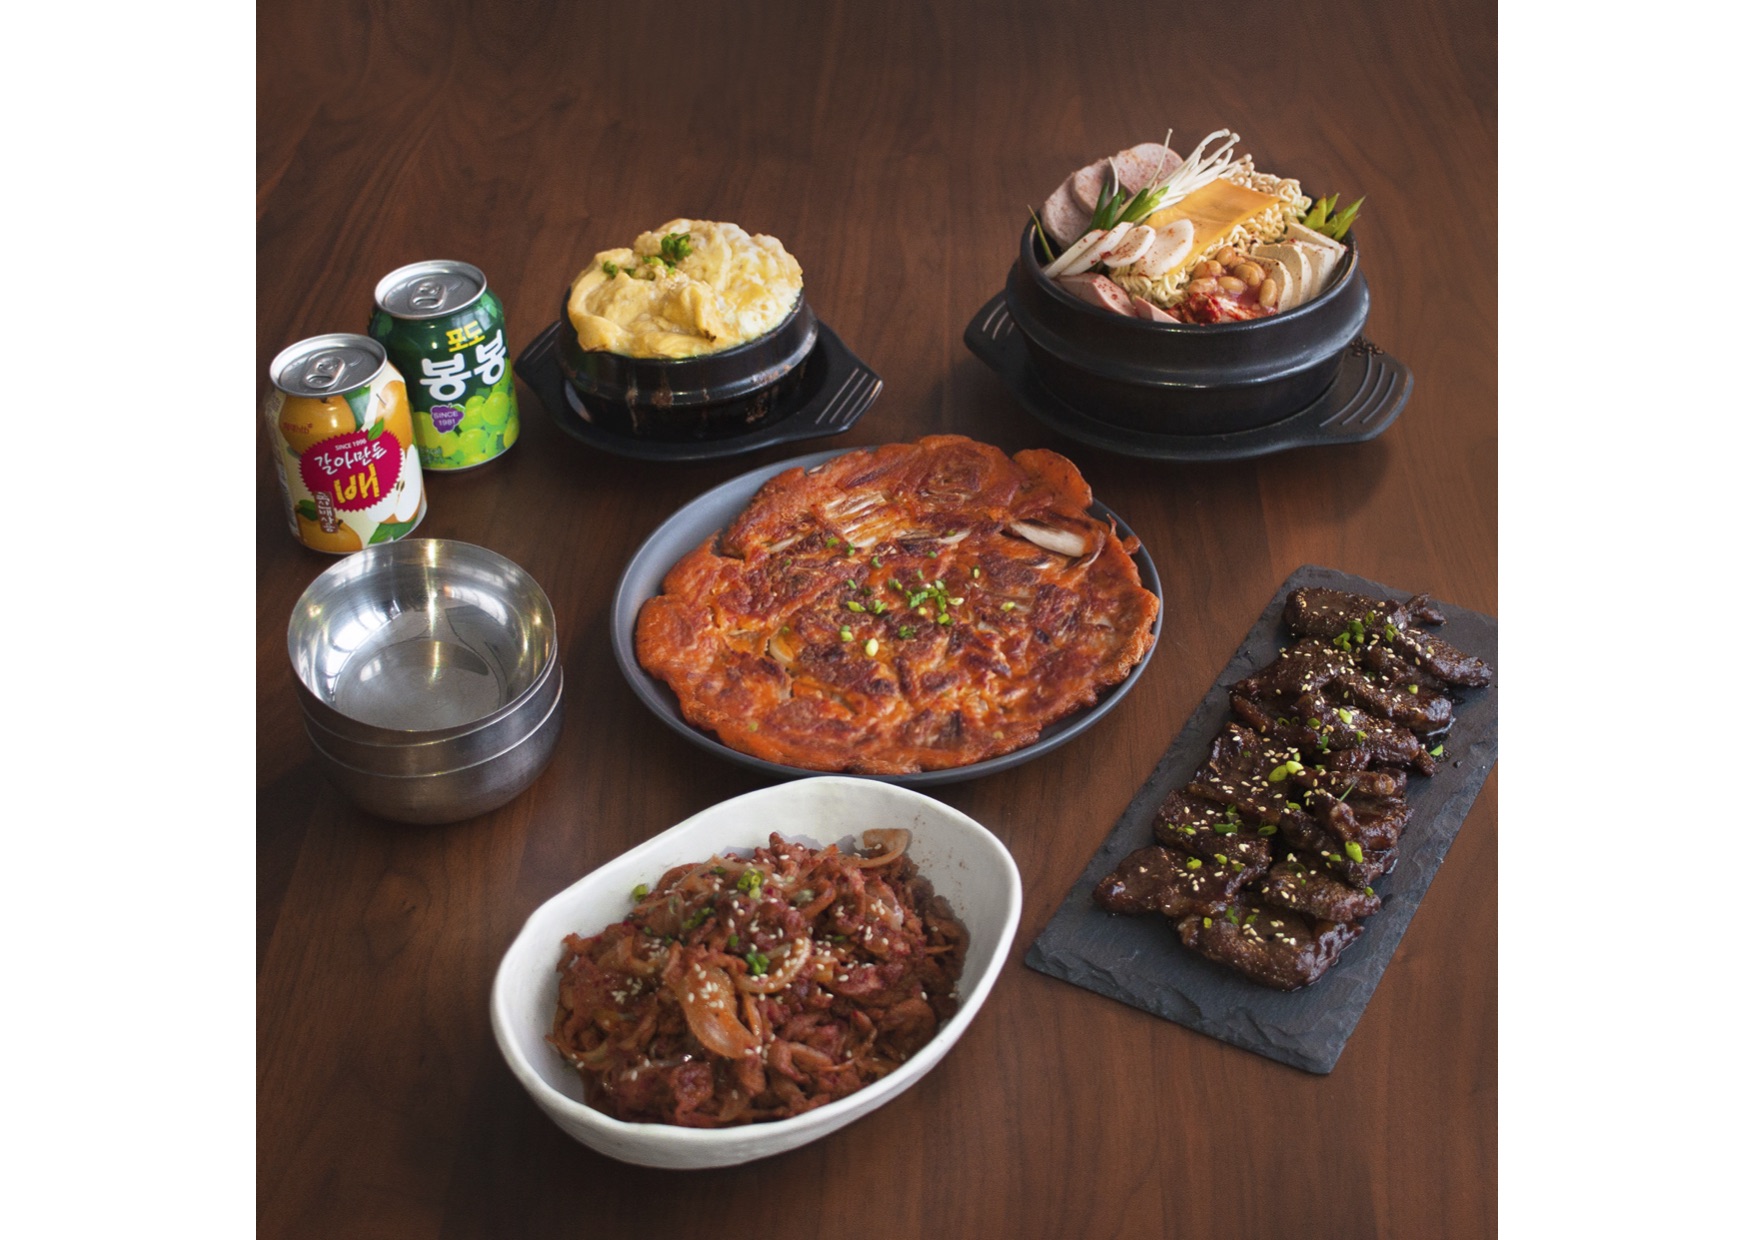 Ajumma's Platter for 4 Pax ($56), delivered islandwide in Singapore, powered by Oddle.

